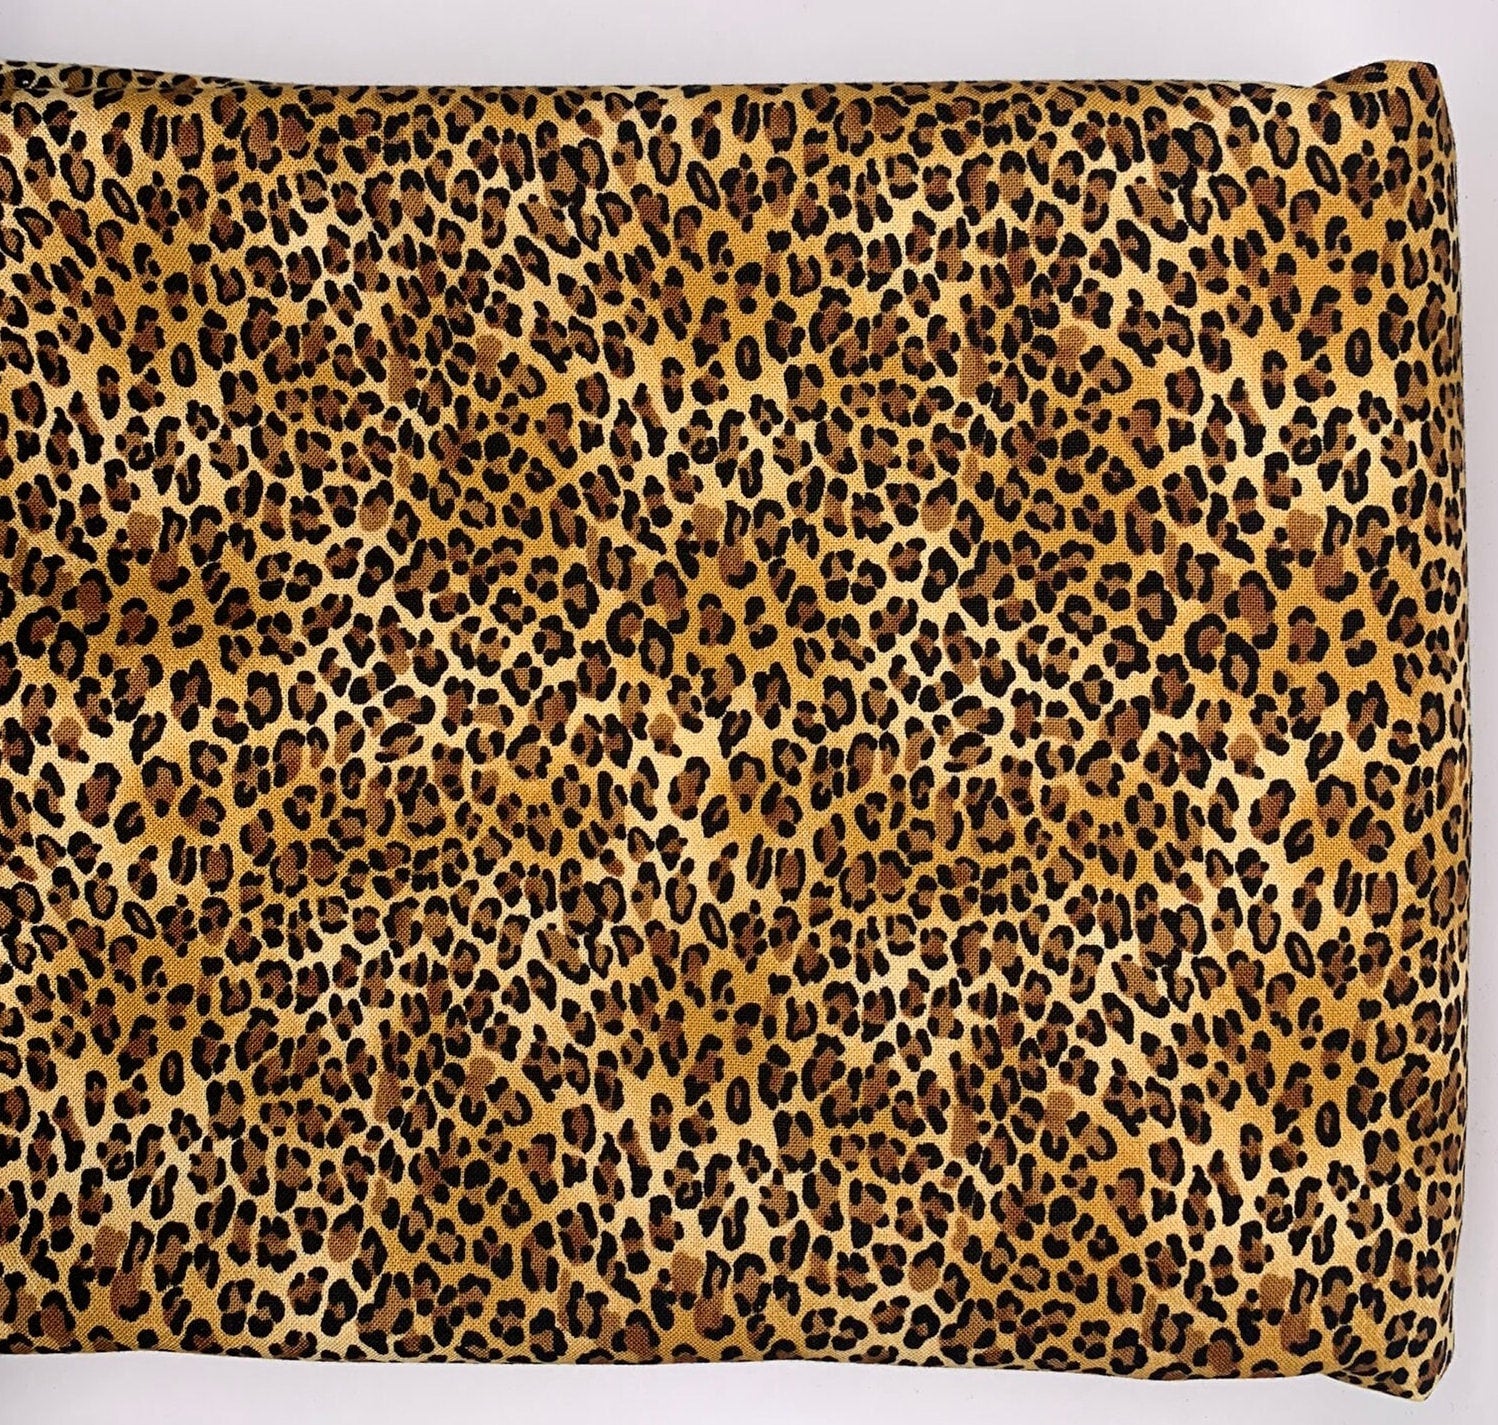 High Quality Quilt Fabric-Sold by the Yard- Timeless Treasures- Leopard Print-100% Cotton Fabric